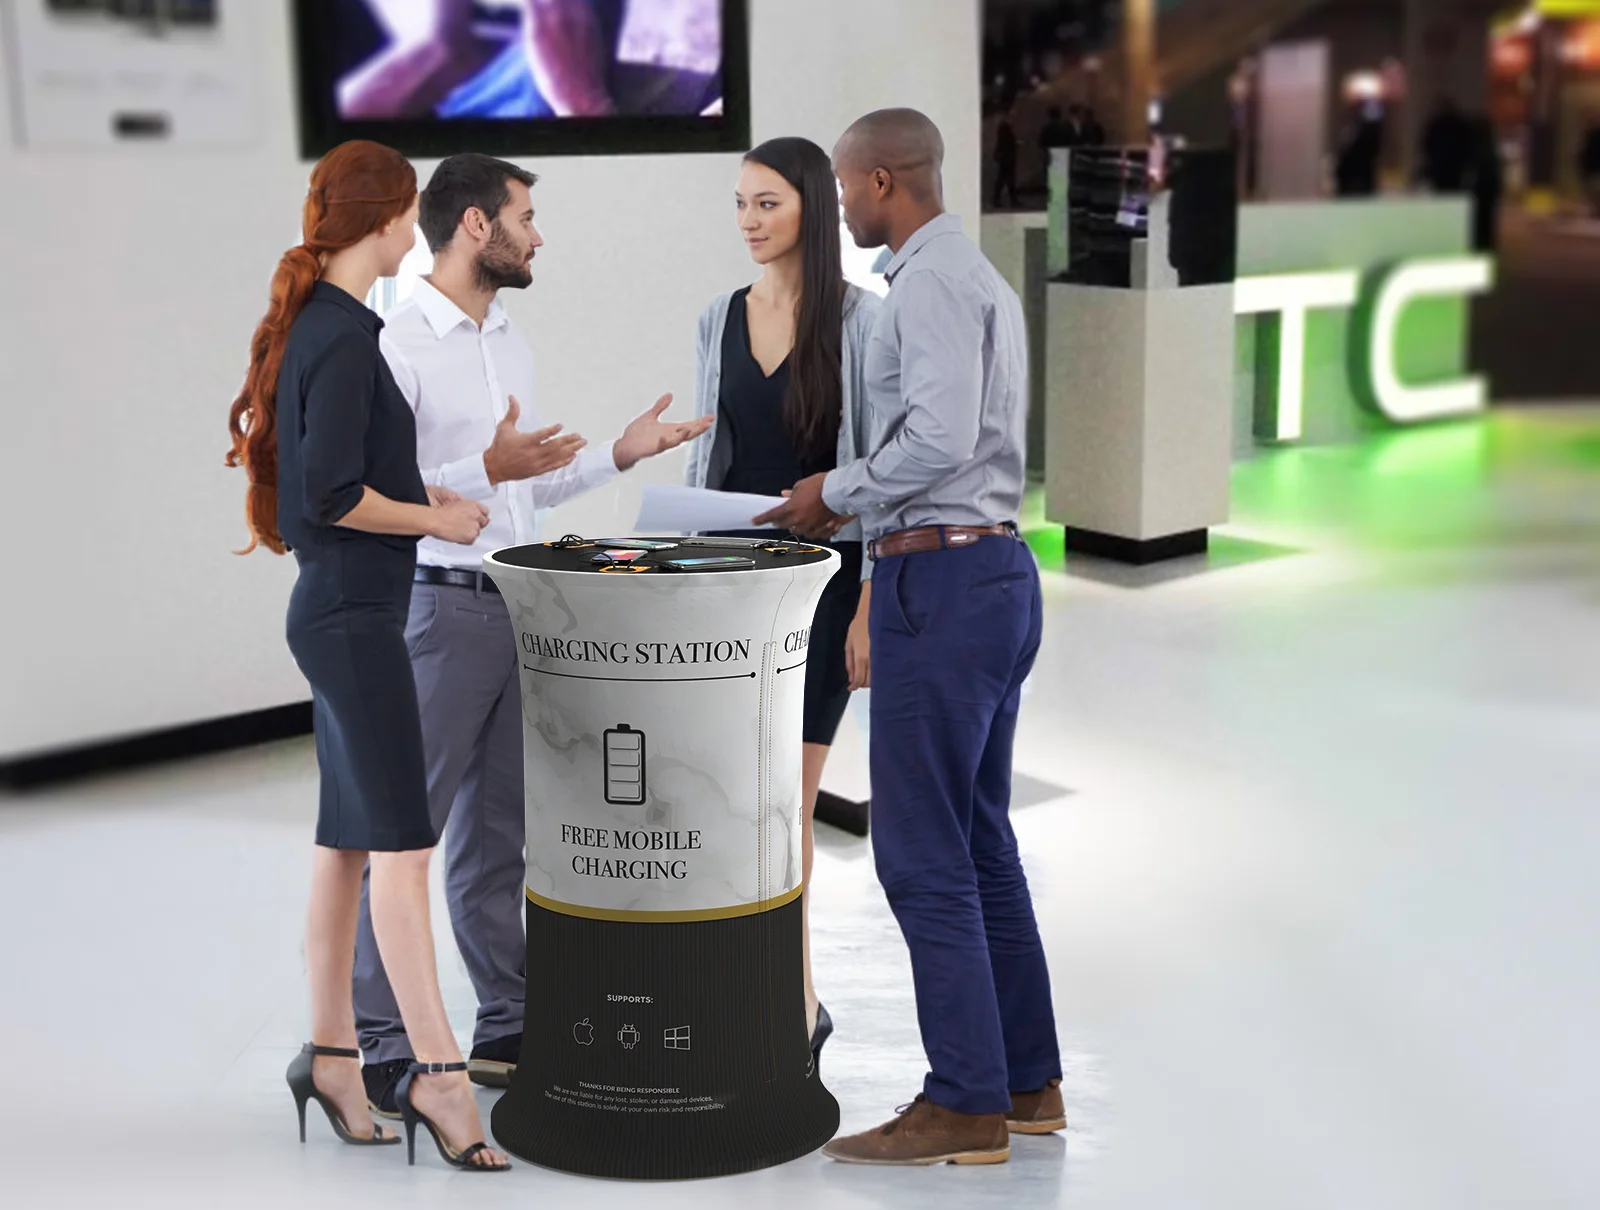 KiDiGi GYPSY Table Exhibition Portable Retail Display Table Advertising Foldable with Wireless Charger